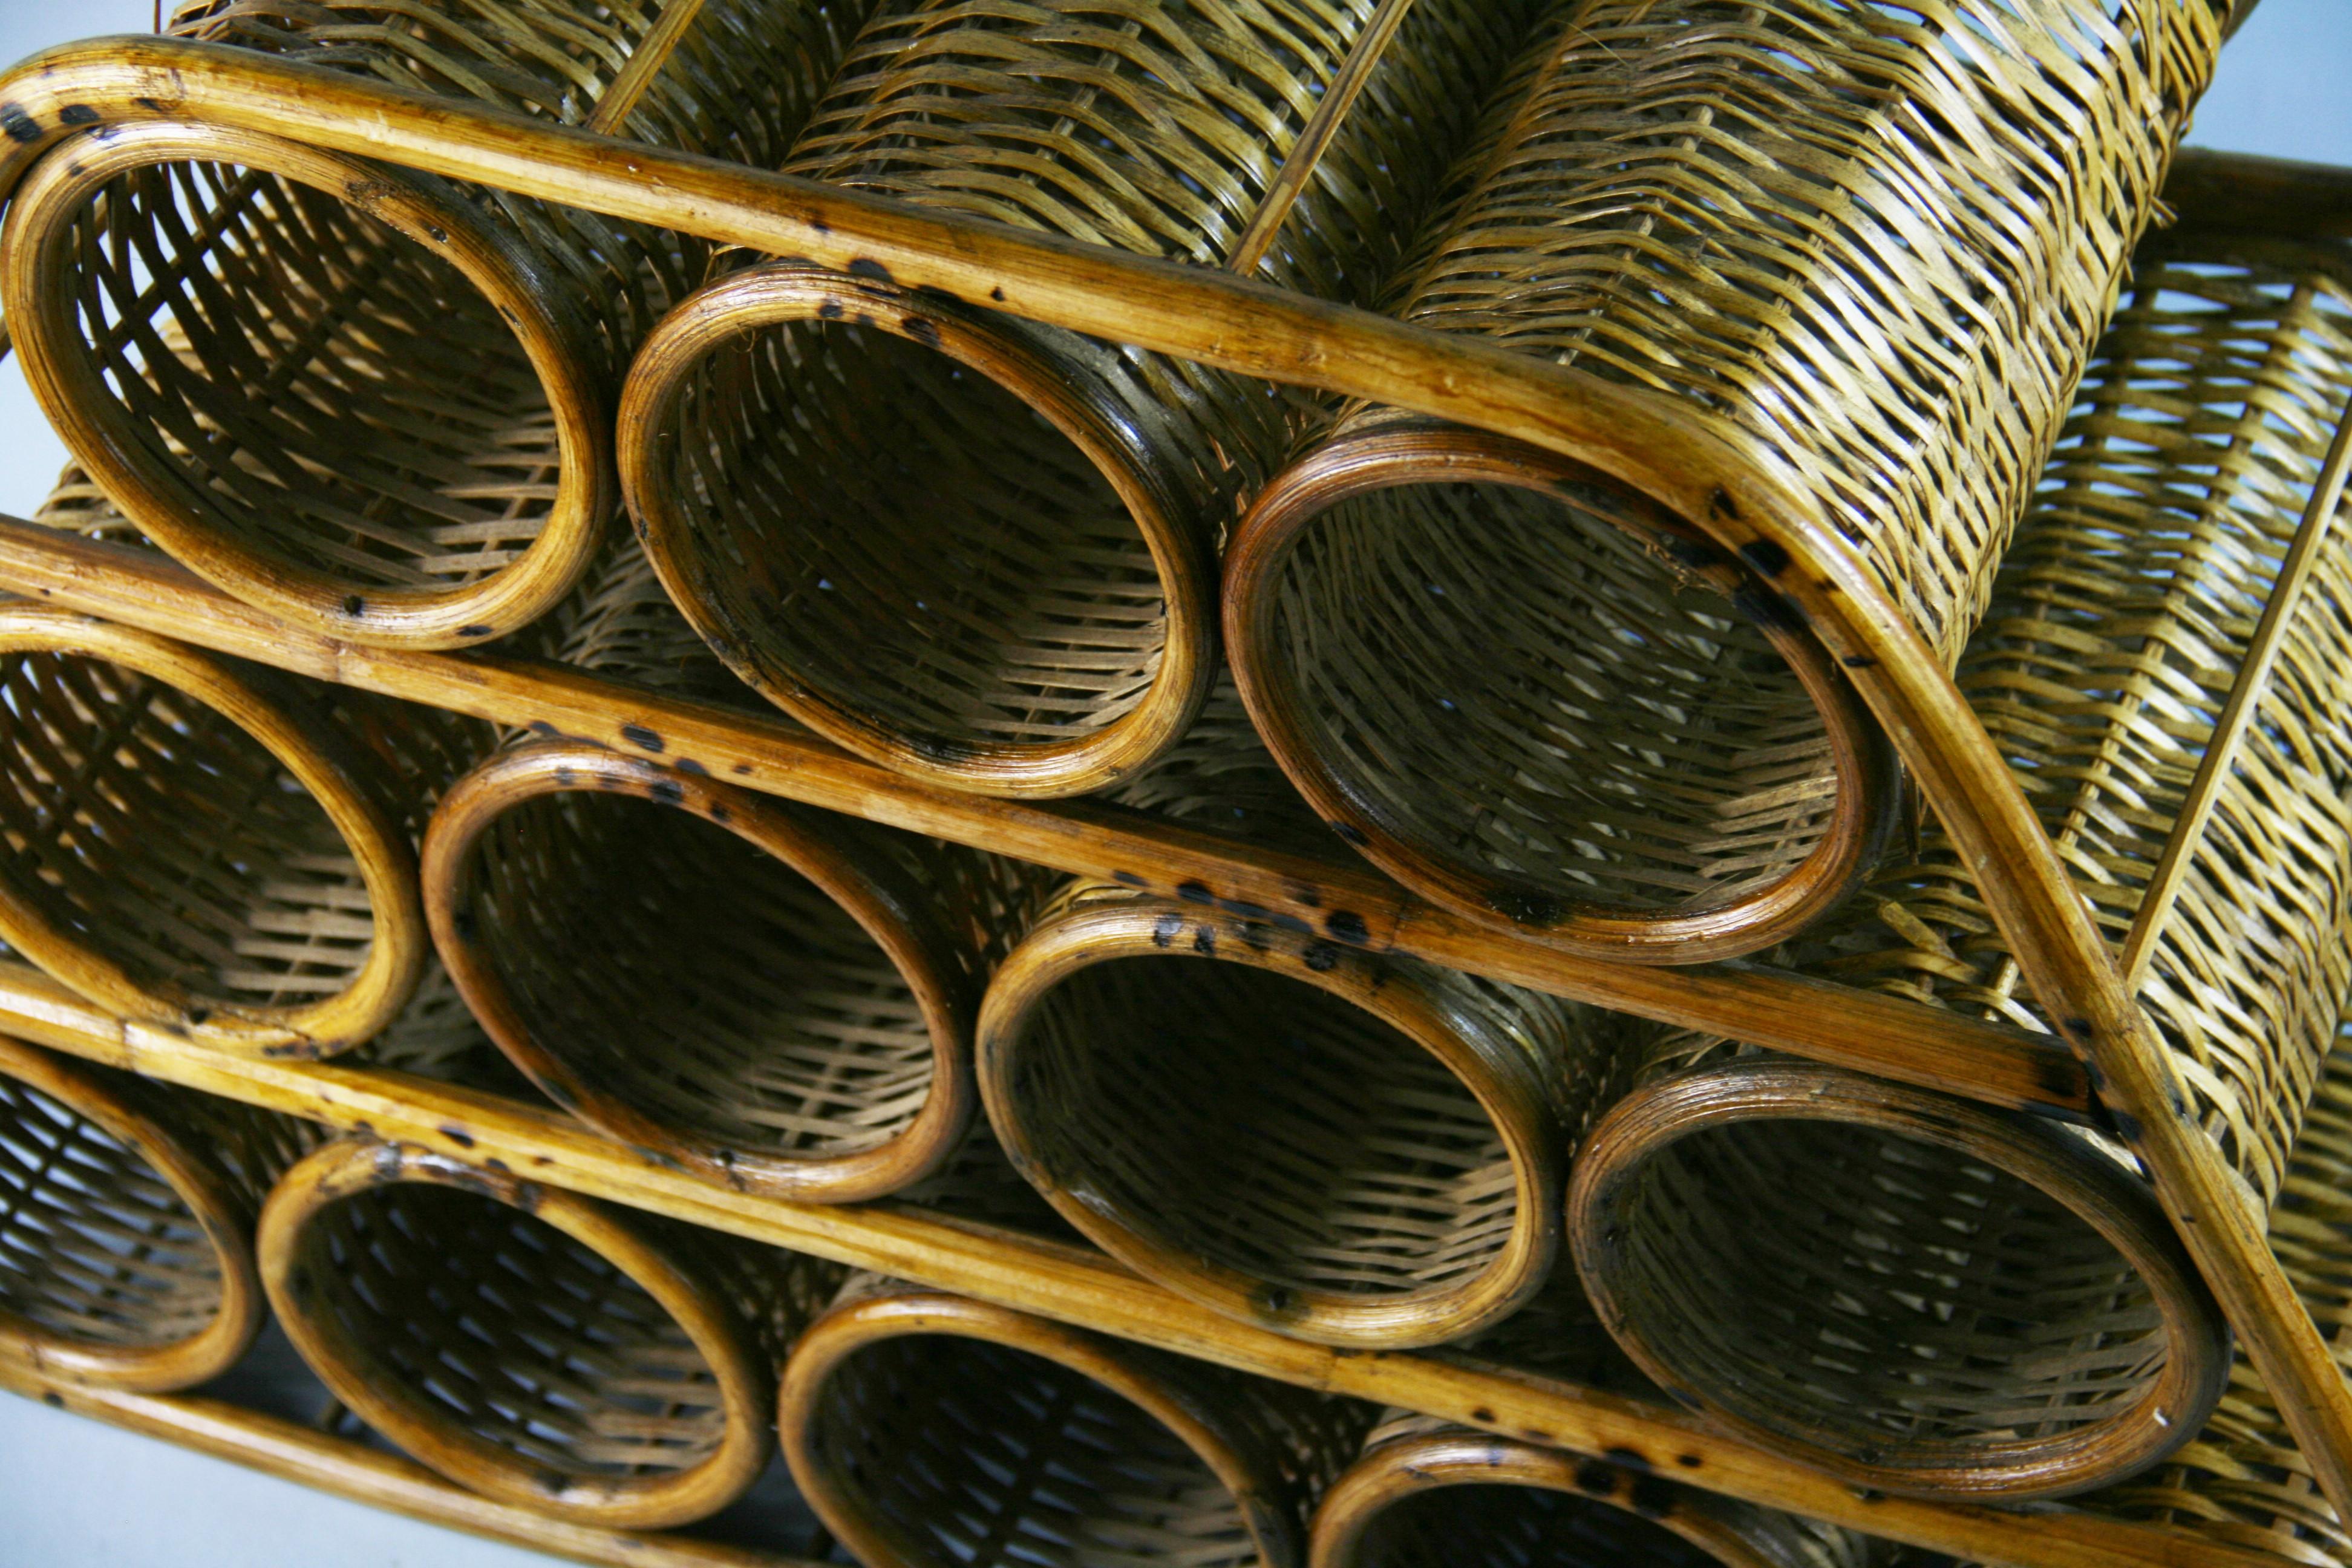 European French Wicker and Bamboo 12 Bottle Wine Rack, 1960's For Sale